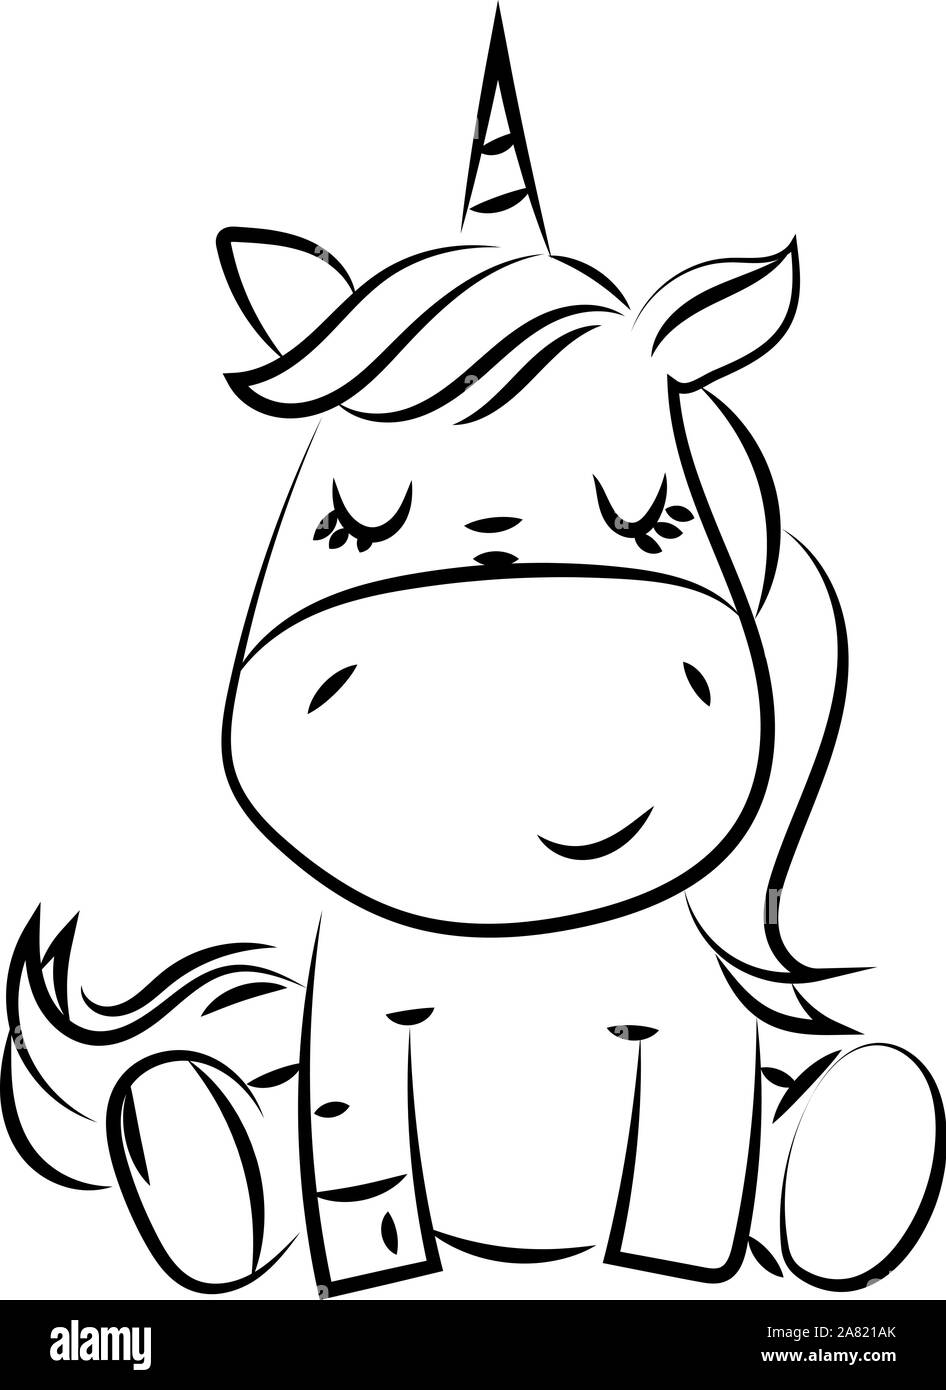 Realistic Unicorn Outline Coloring Page - ColoringAll